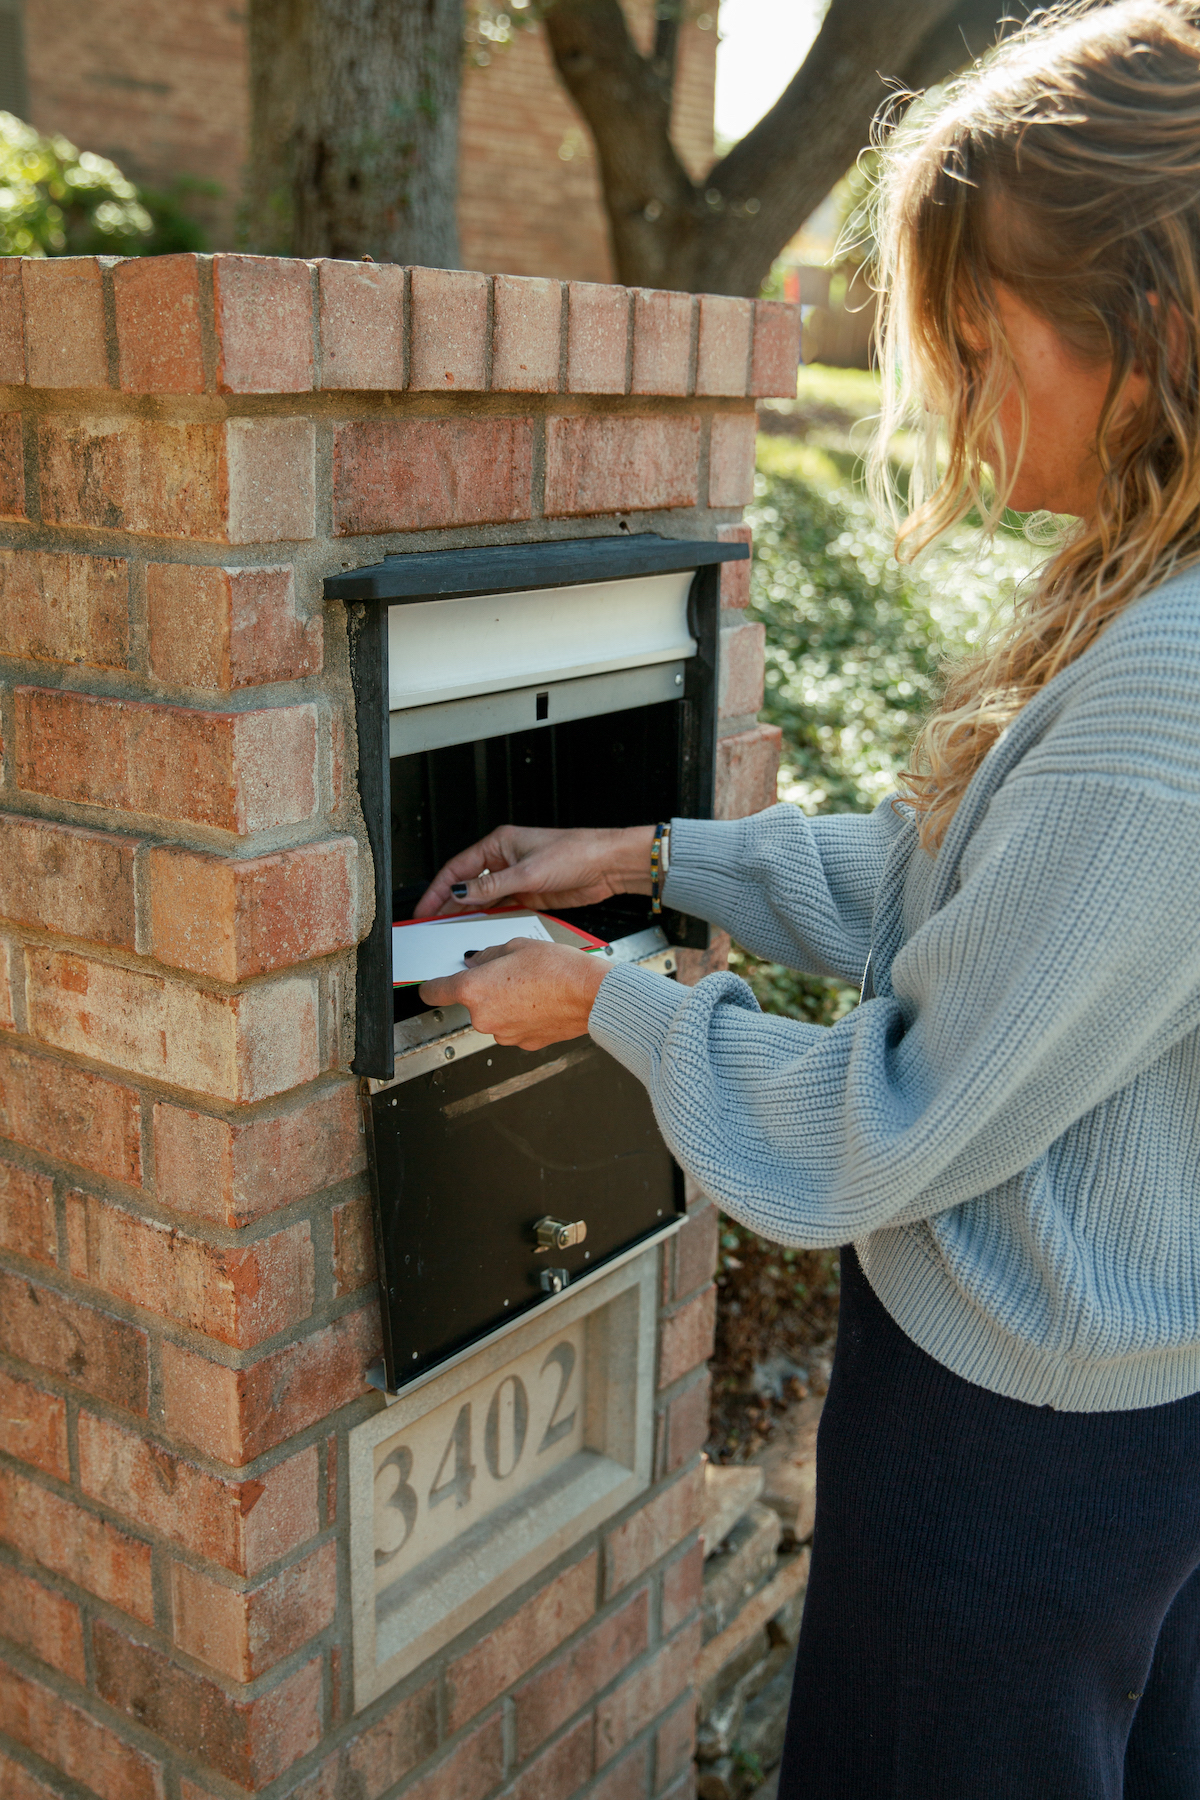 checking a large mailbox and pulling out envelopes